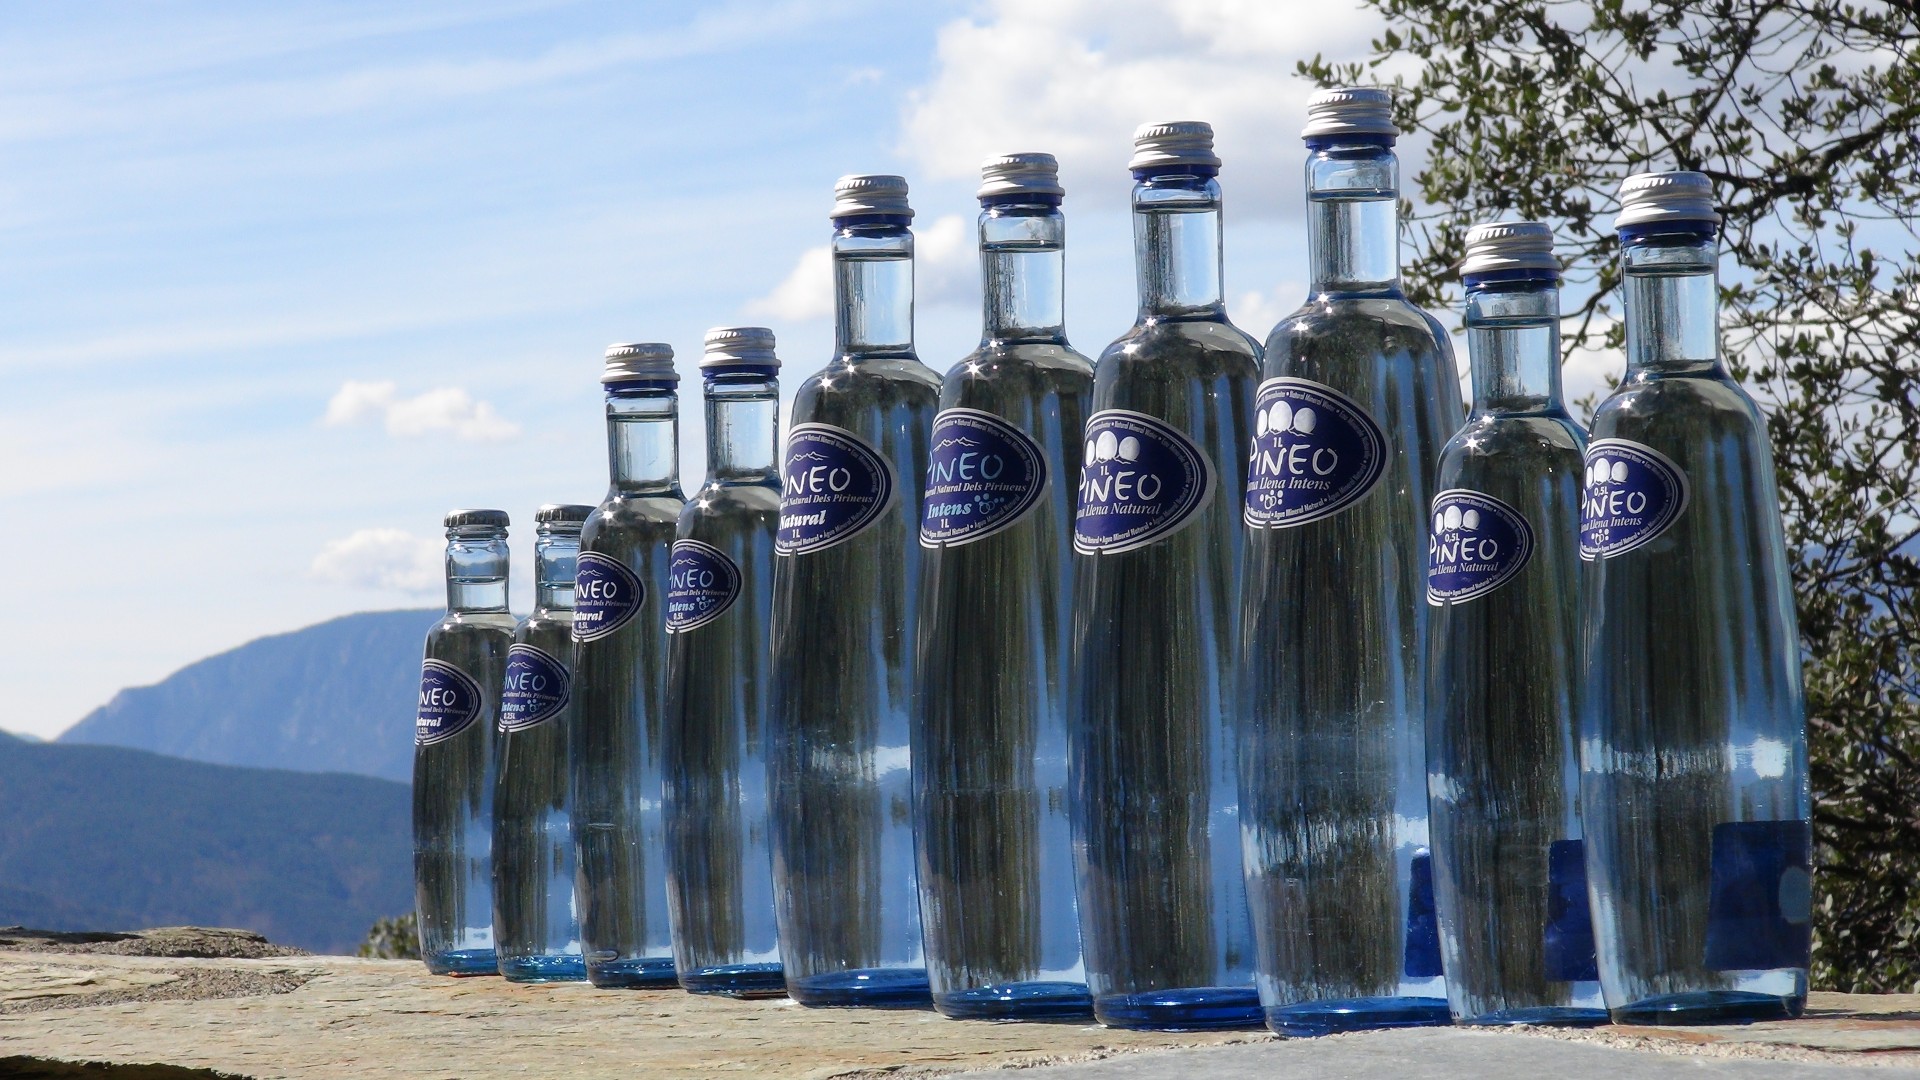 Pineo is a natural mineral water and is environmentally friendly